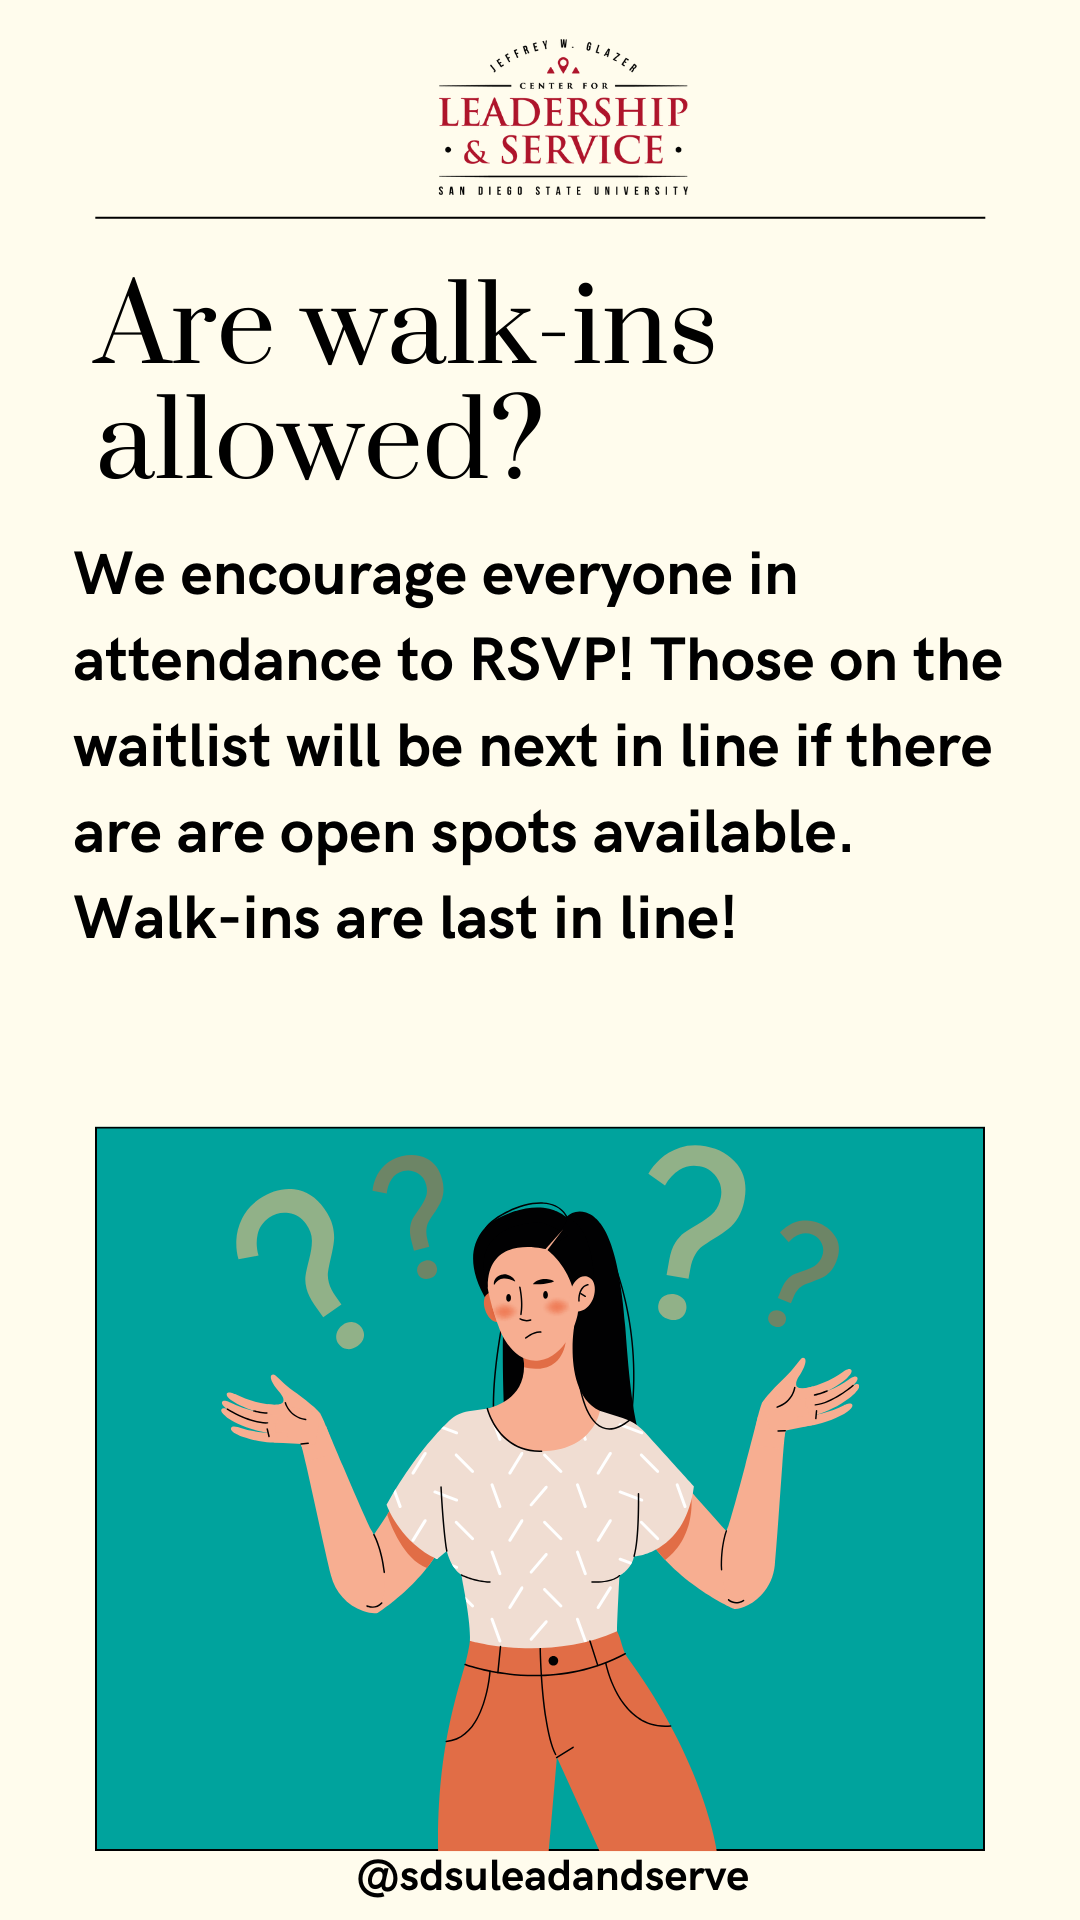 Are walk-ins allowed? We encourage everyone in attendance to RSVP! Those on the waitlist will be next in line if there are are open spots available. Walk-ins are last in line!